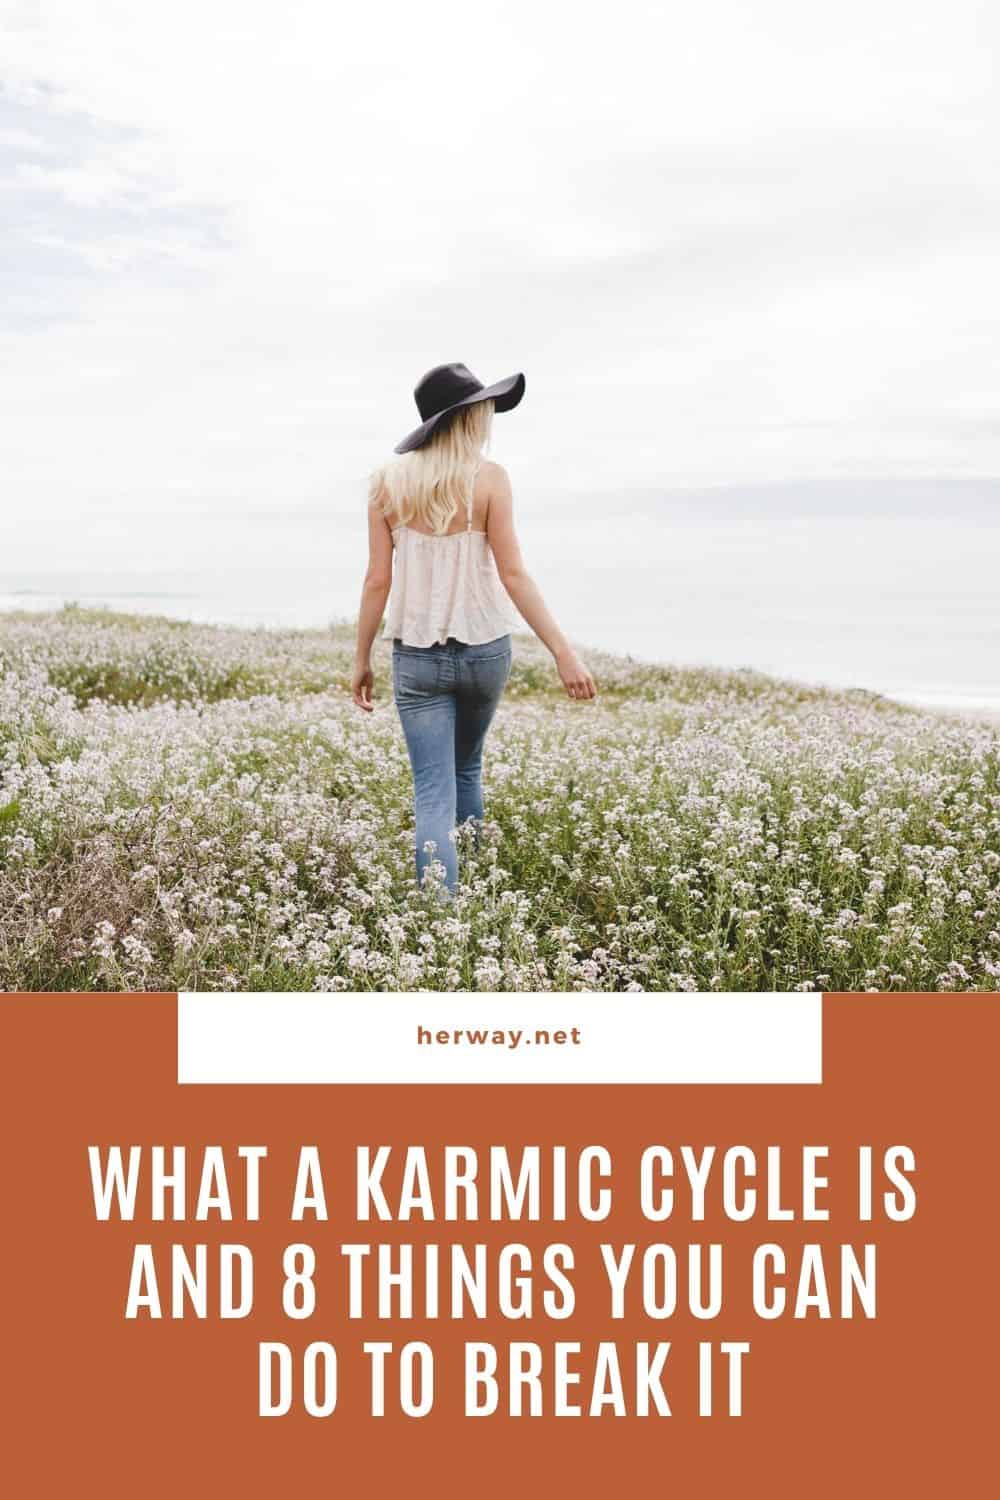 What A Karmic Cycle Is And 8 Things You Can Do To Break It